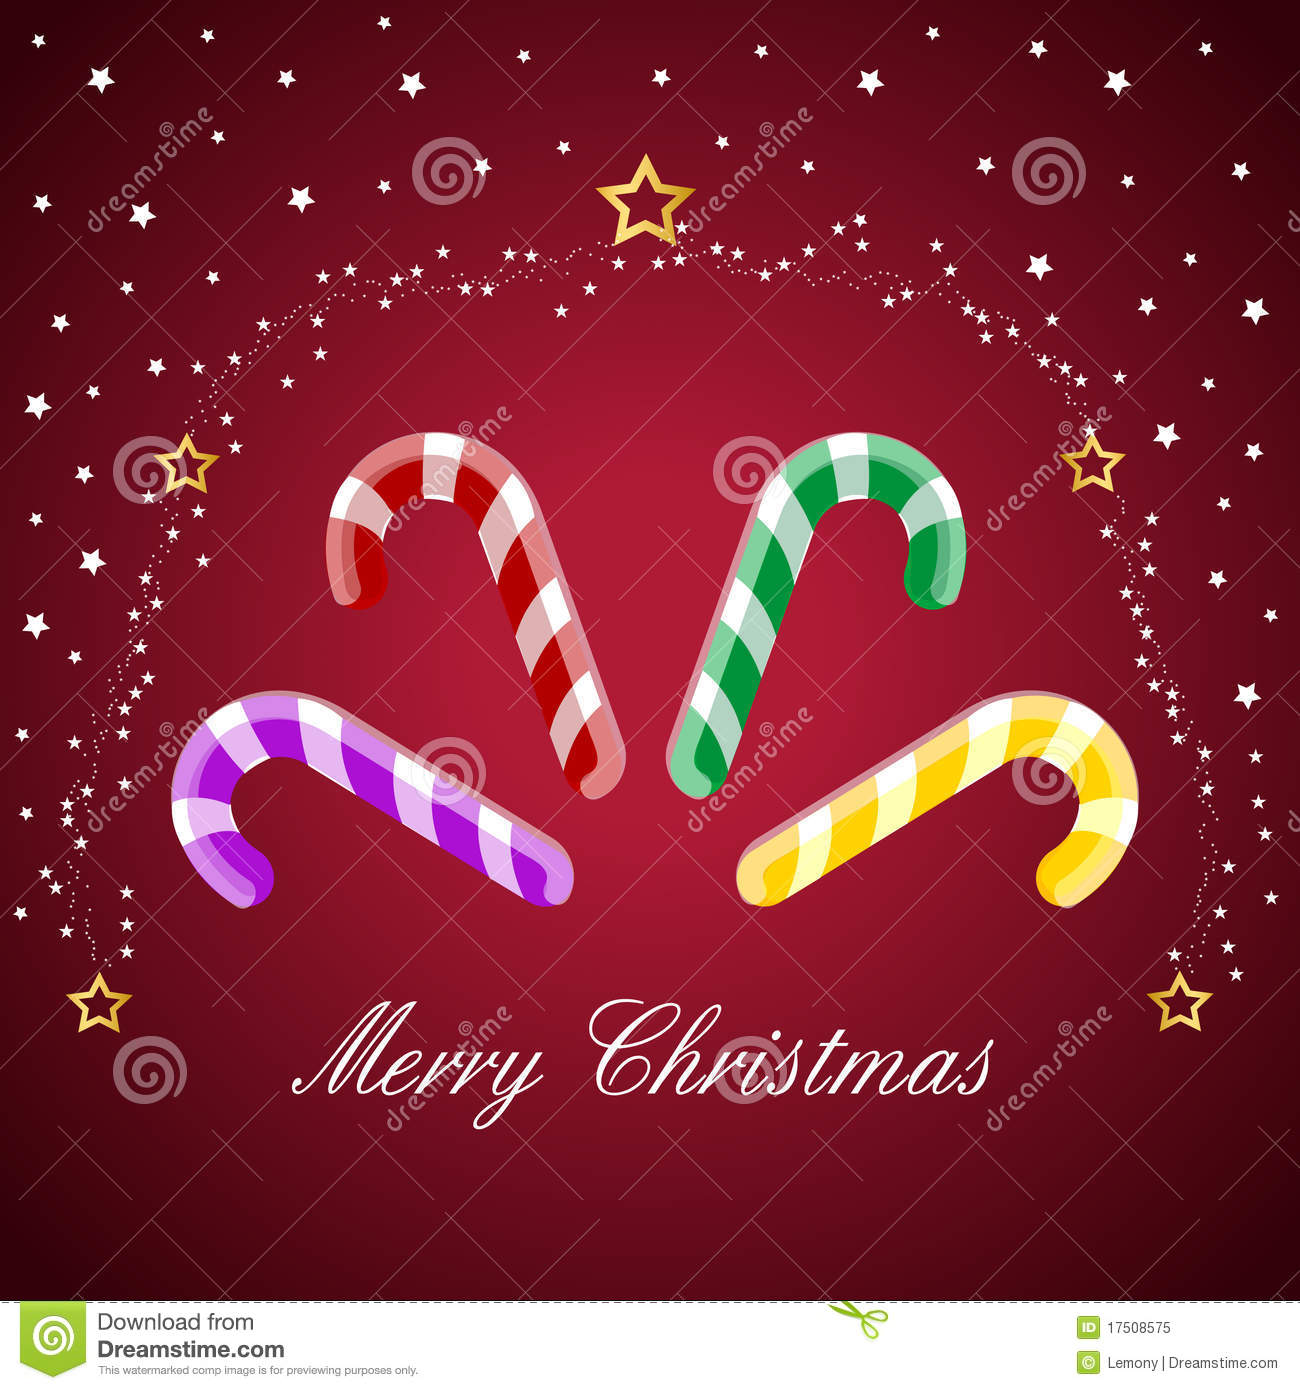 Merry Christmas Candy Cane Royalty Free Stock Photo   Image  17508575